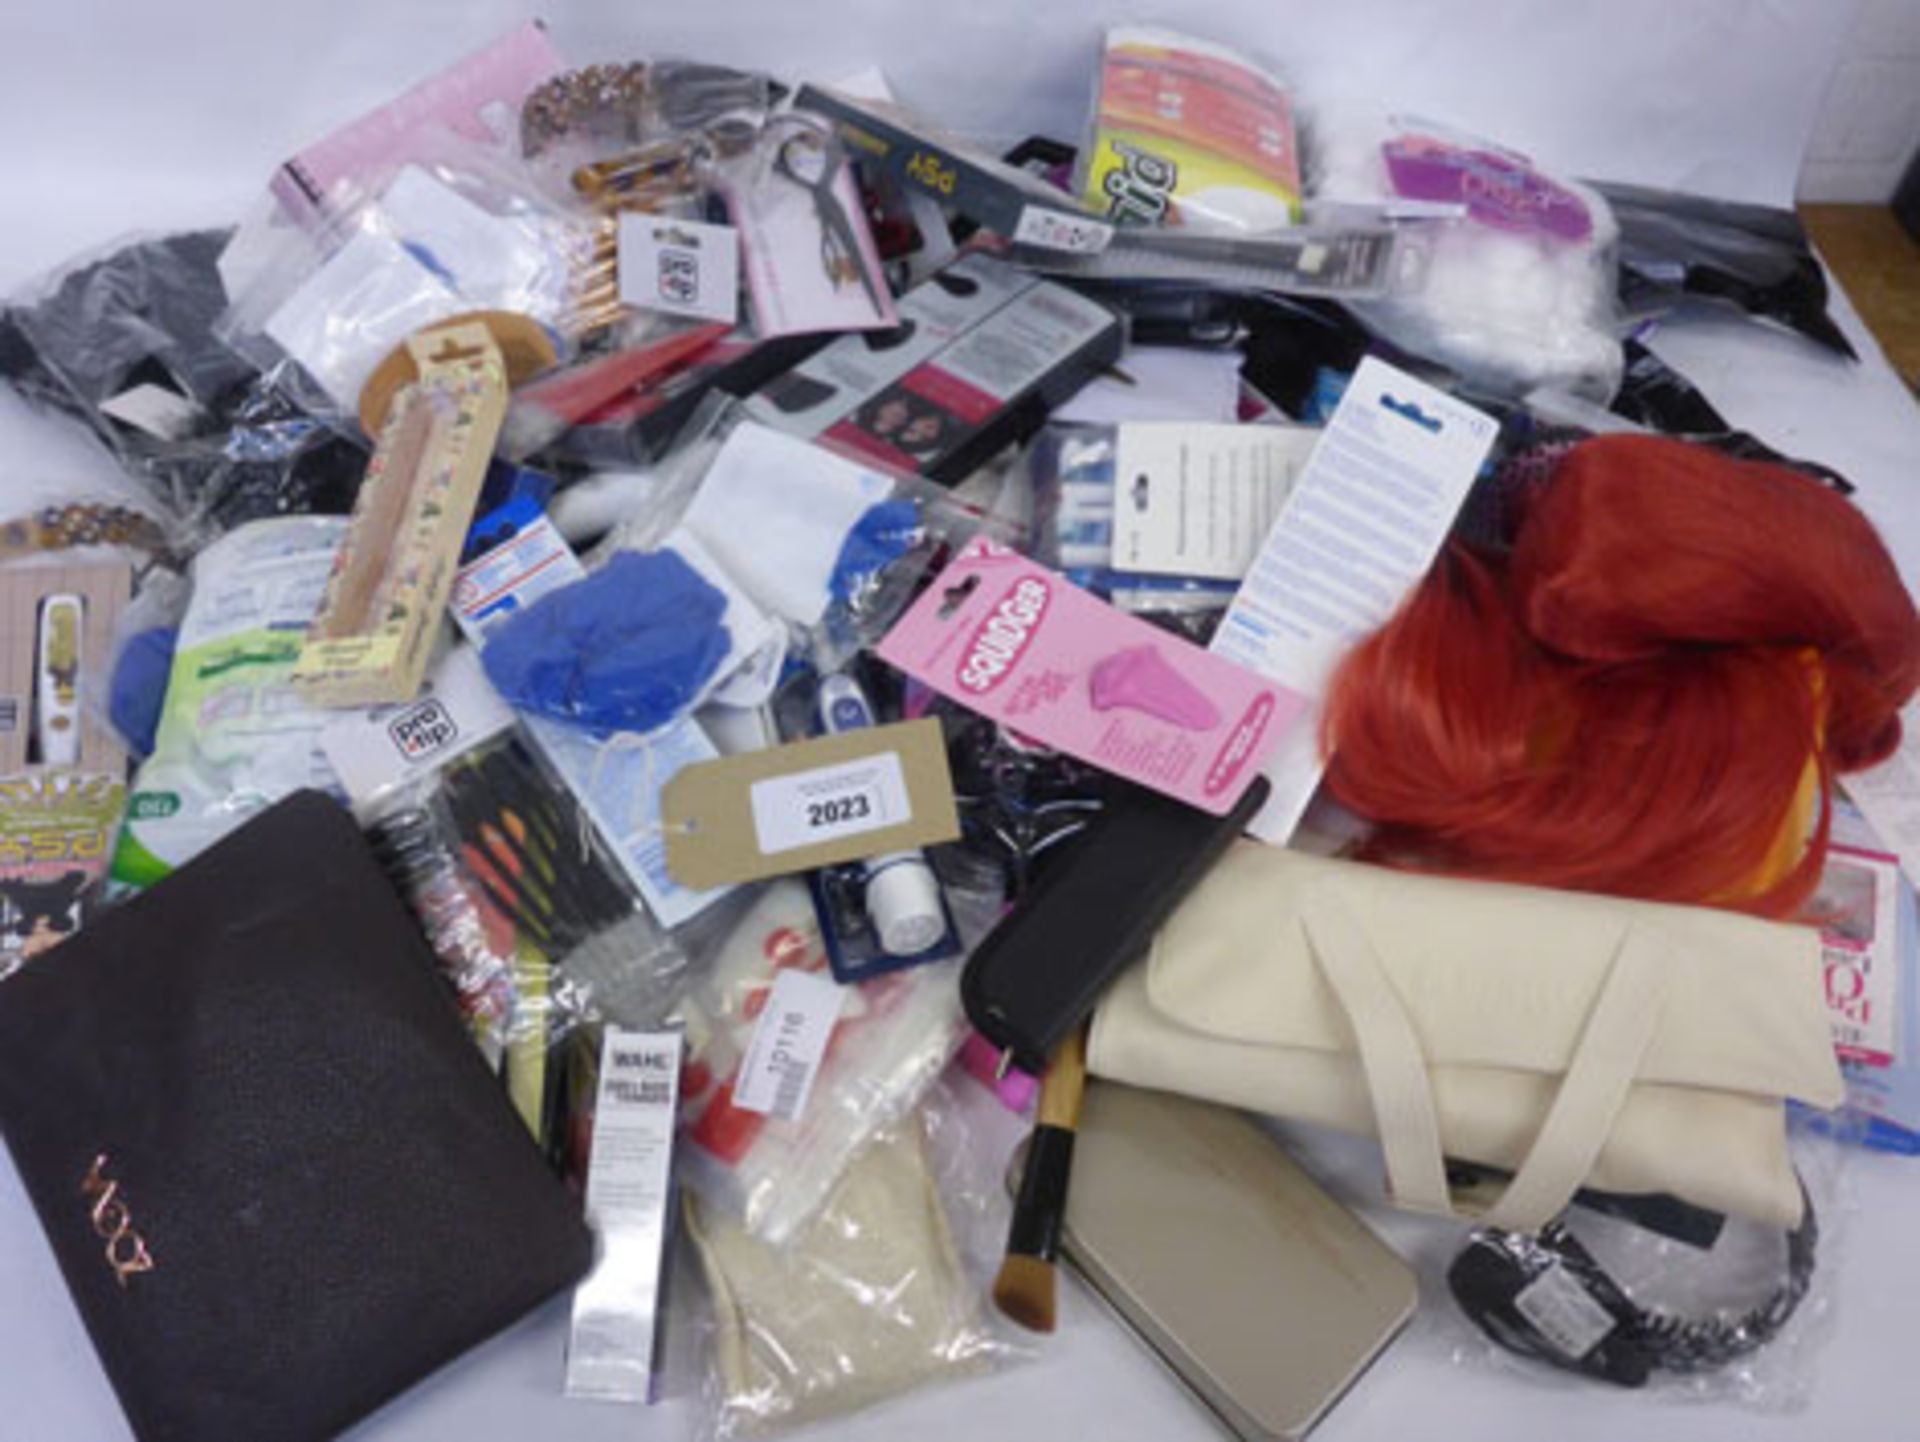 Bag containing toothbrush heads, makeup brushes, wigs, hair pieces, Gillette razors, false nails,